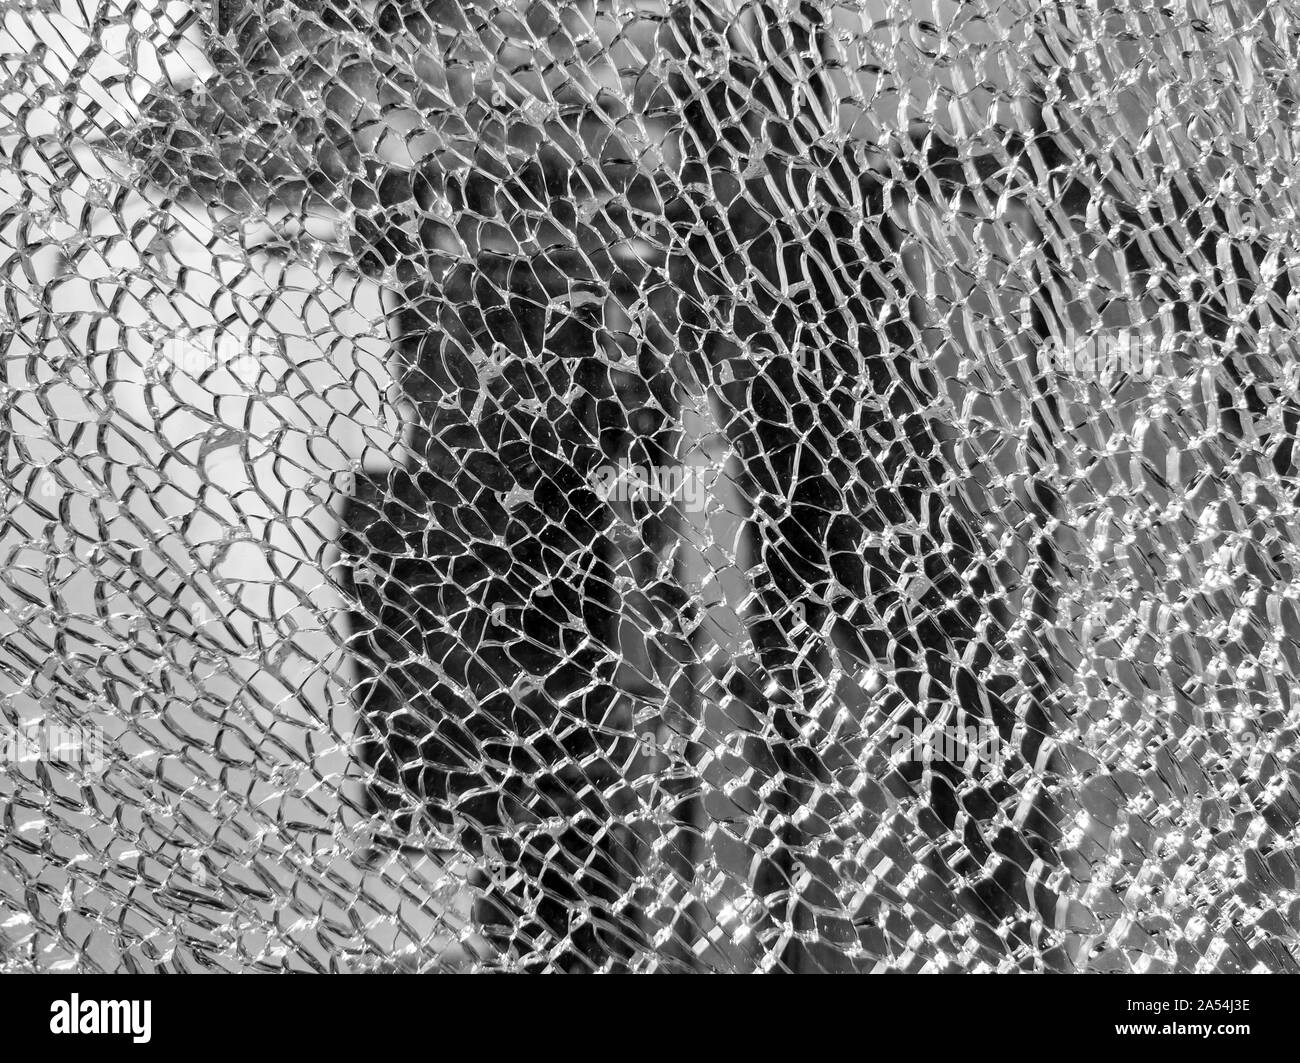 Broken glass background with a web pattern with the city in the background. Destruction, security, armored, shard, vandalism. Stock Photo